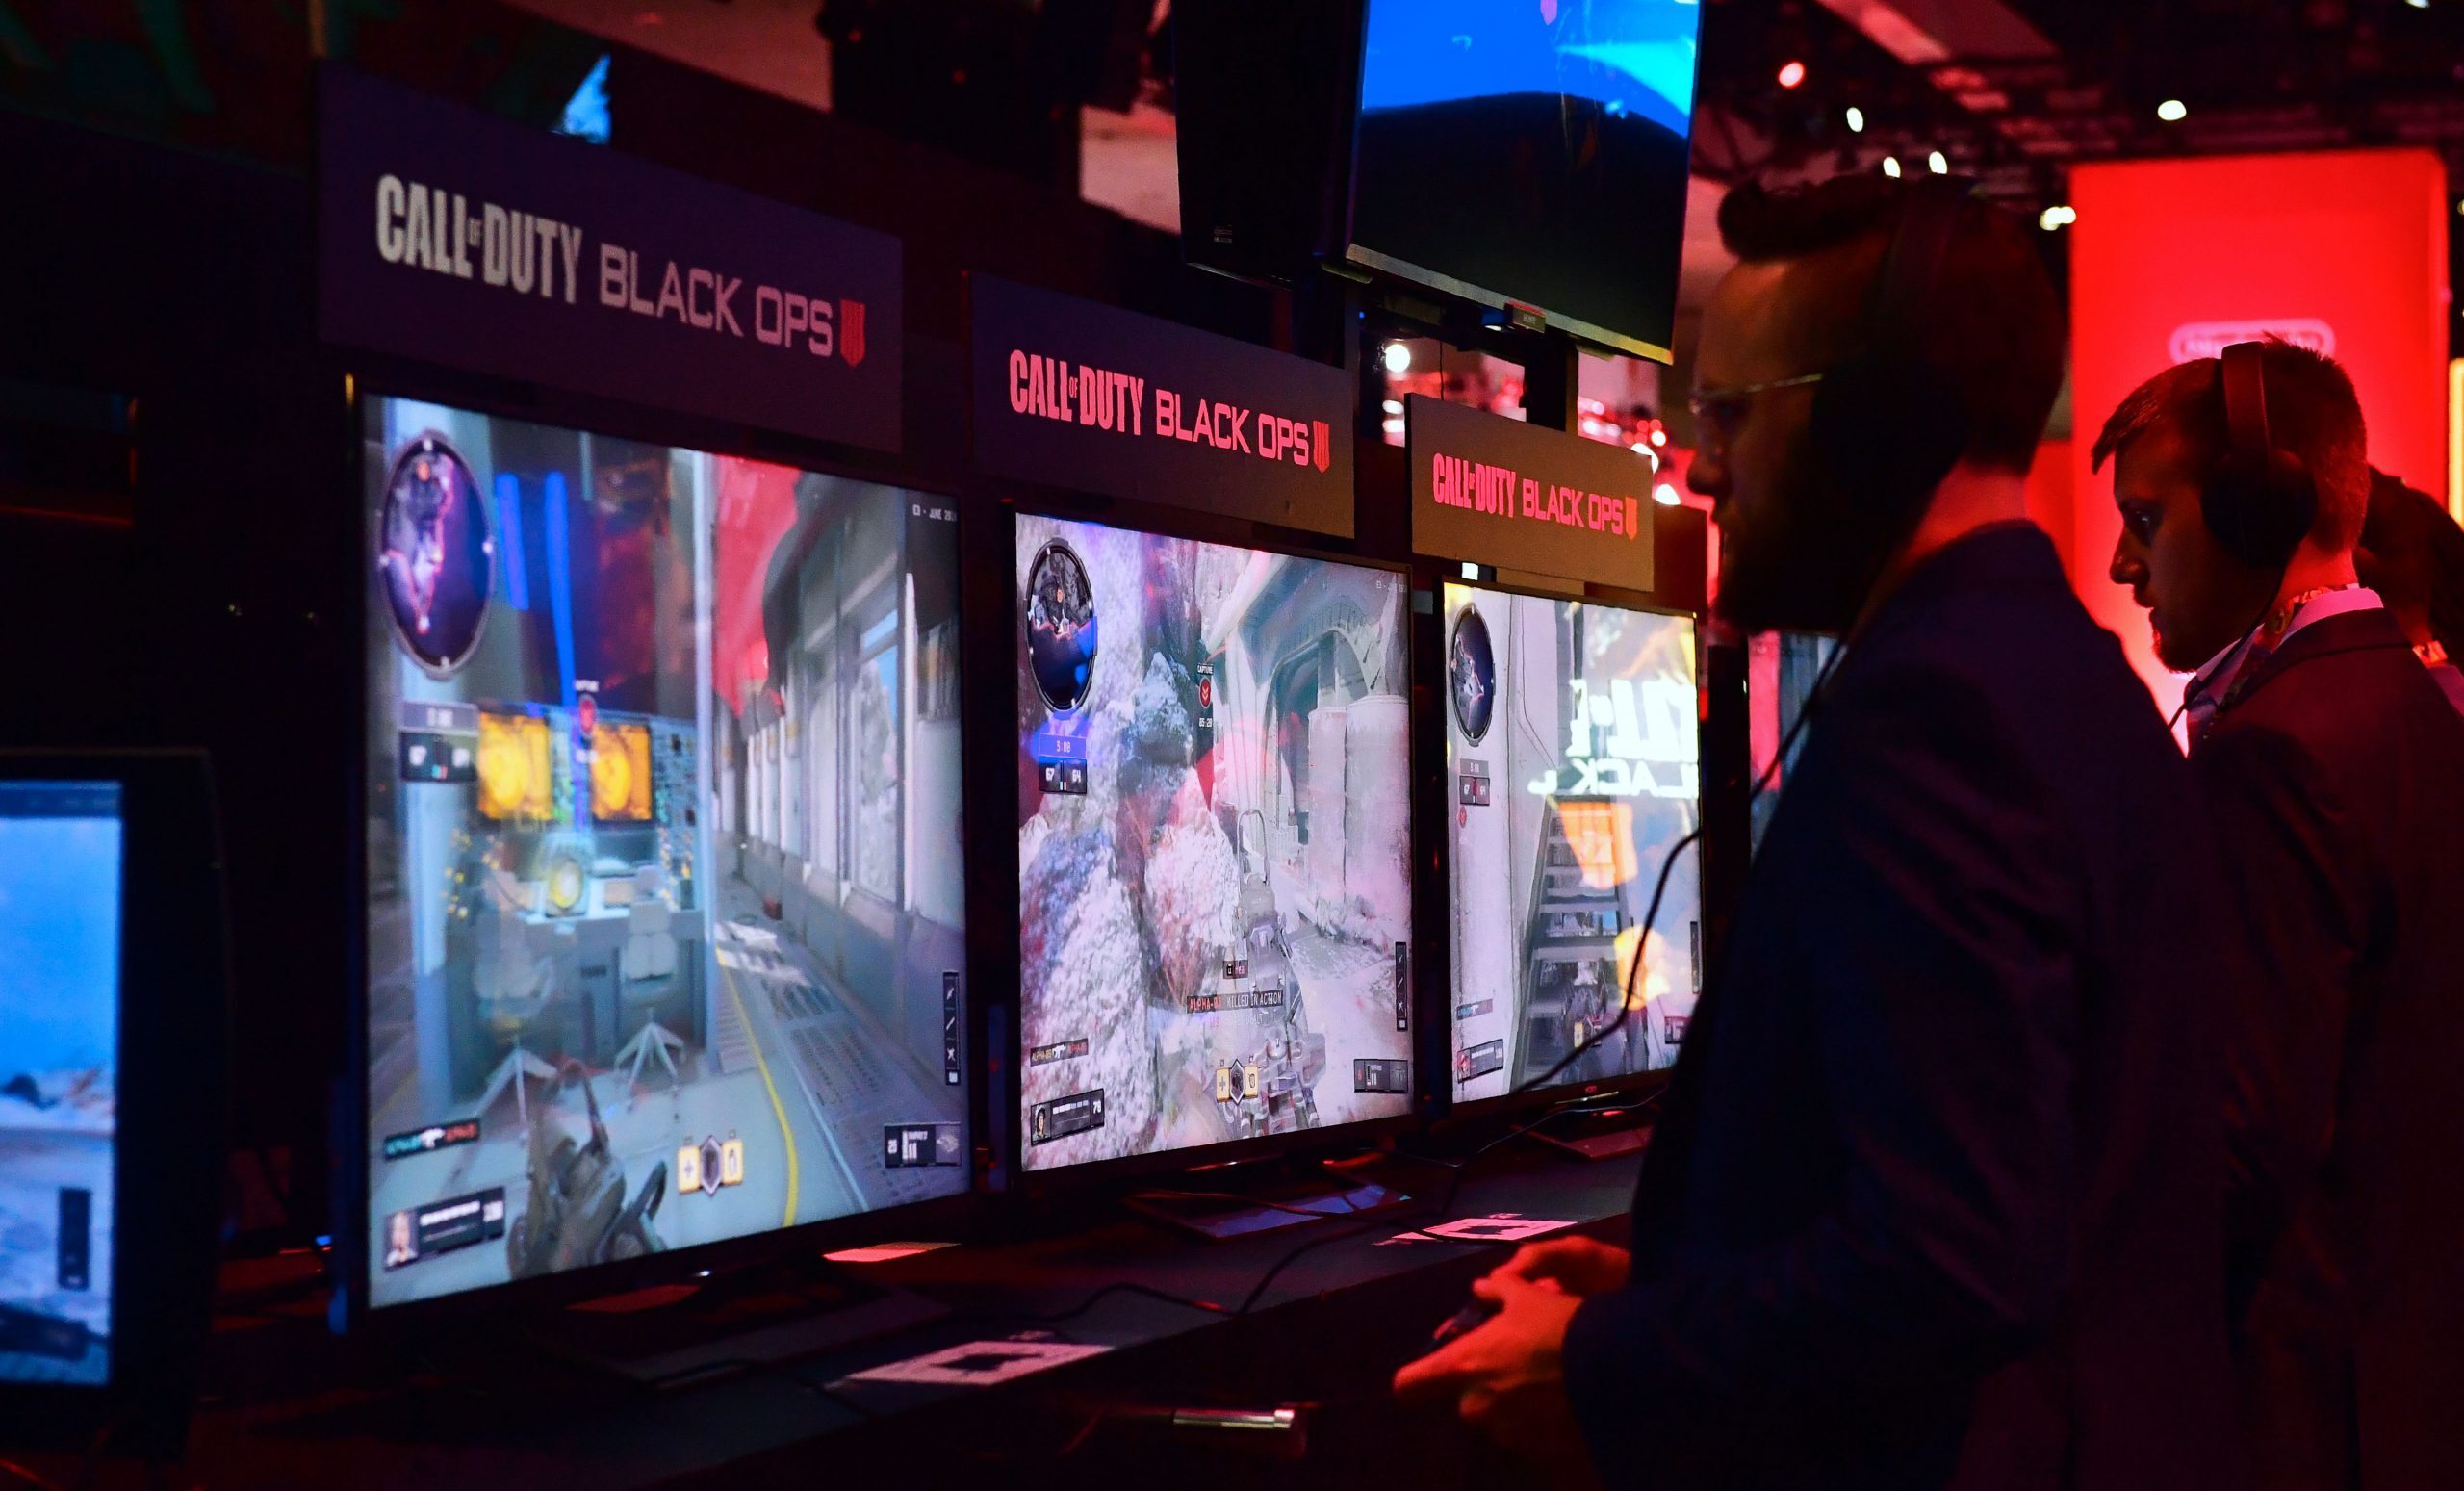 Gamers play the game Call of Duty: Black Ops at E3 2018, (Photo courtesy of Getty Images)